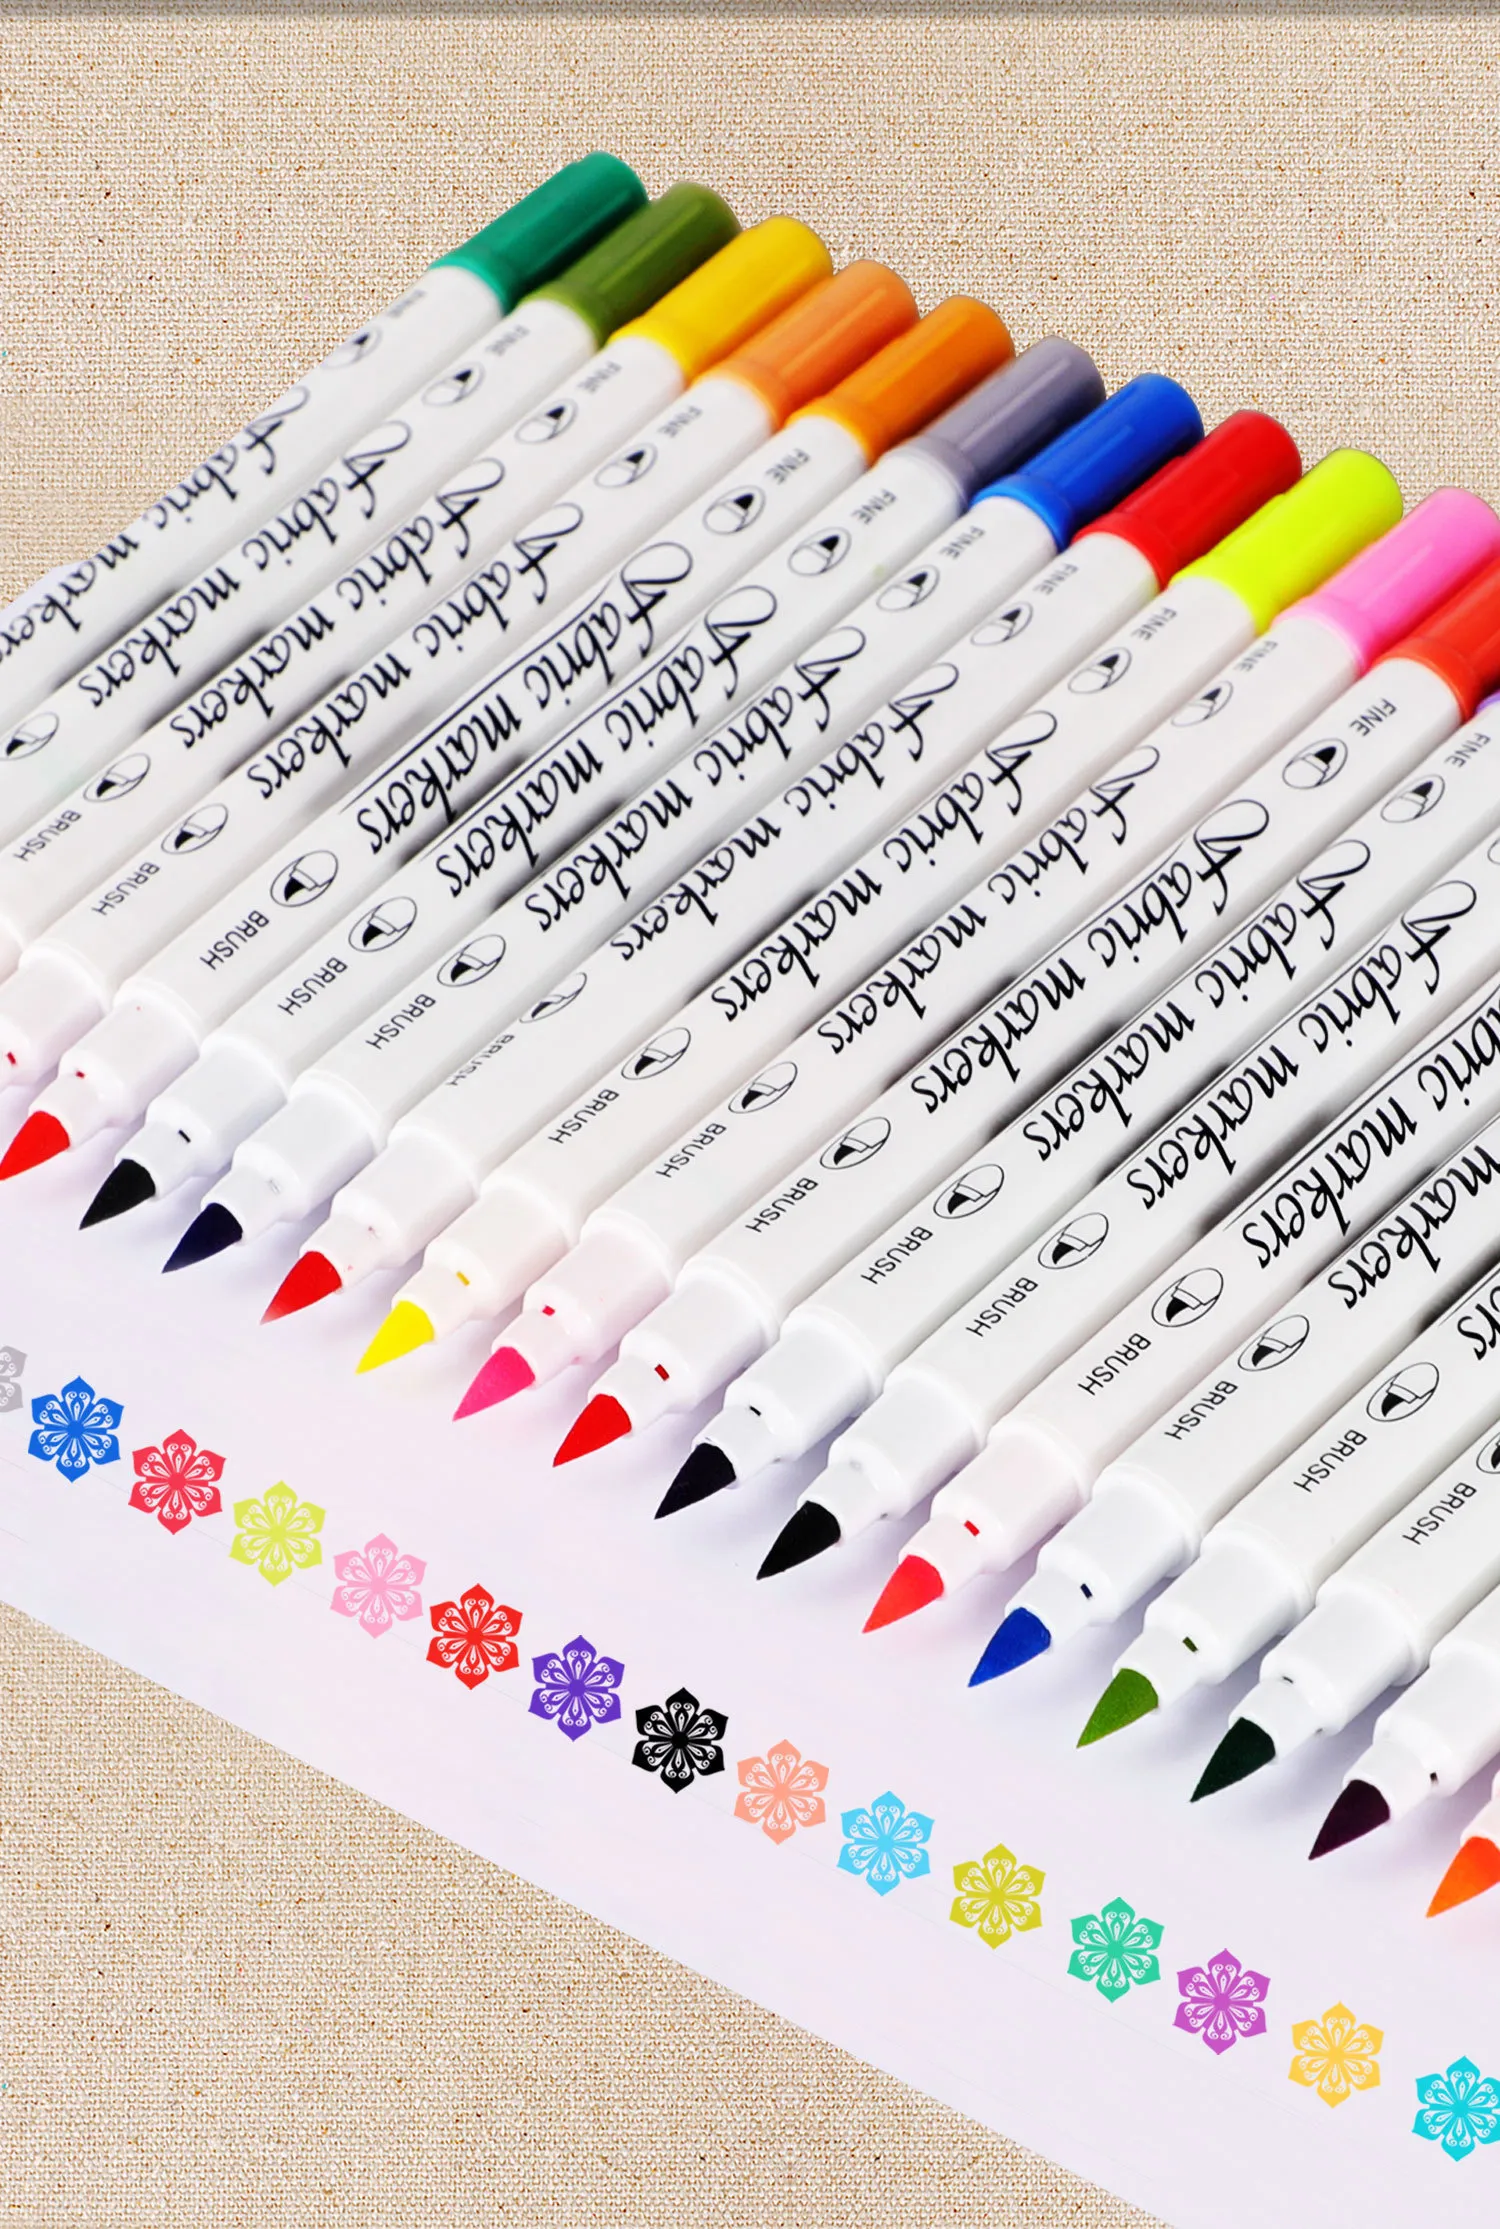 Wholesale Dual Tip Fabric Markers For Permanent Art 12/Ideal For T Shirts,  Vionic Sneakers, Canvas Bags Perfect For Kids And Adults Item #230818 From  Long10, $11.89